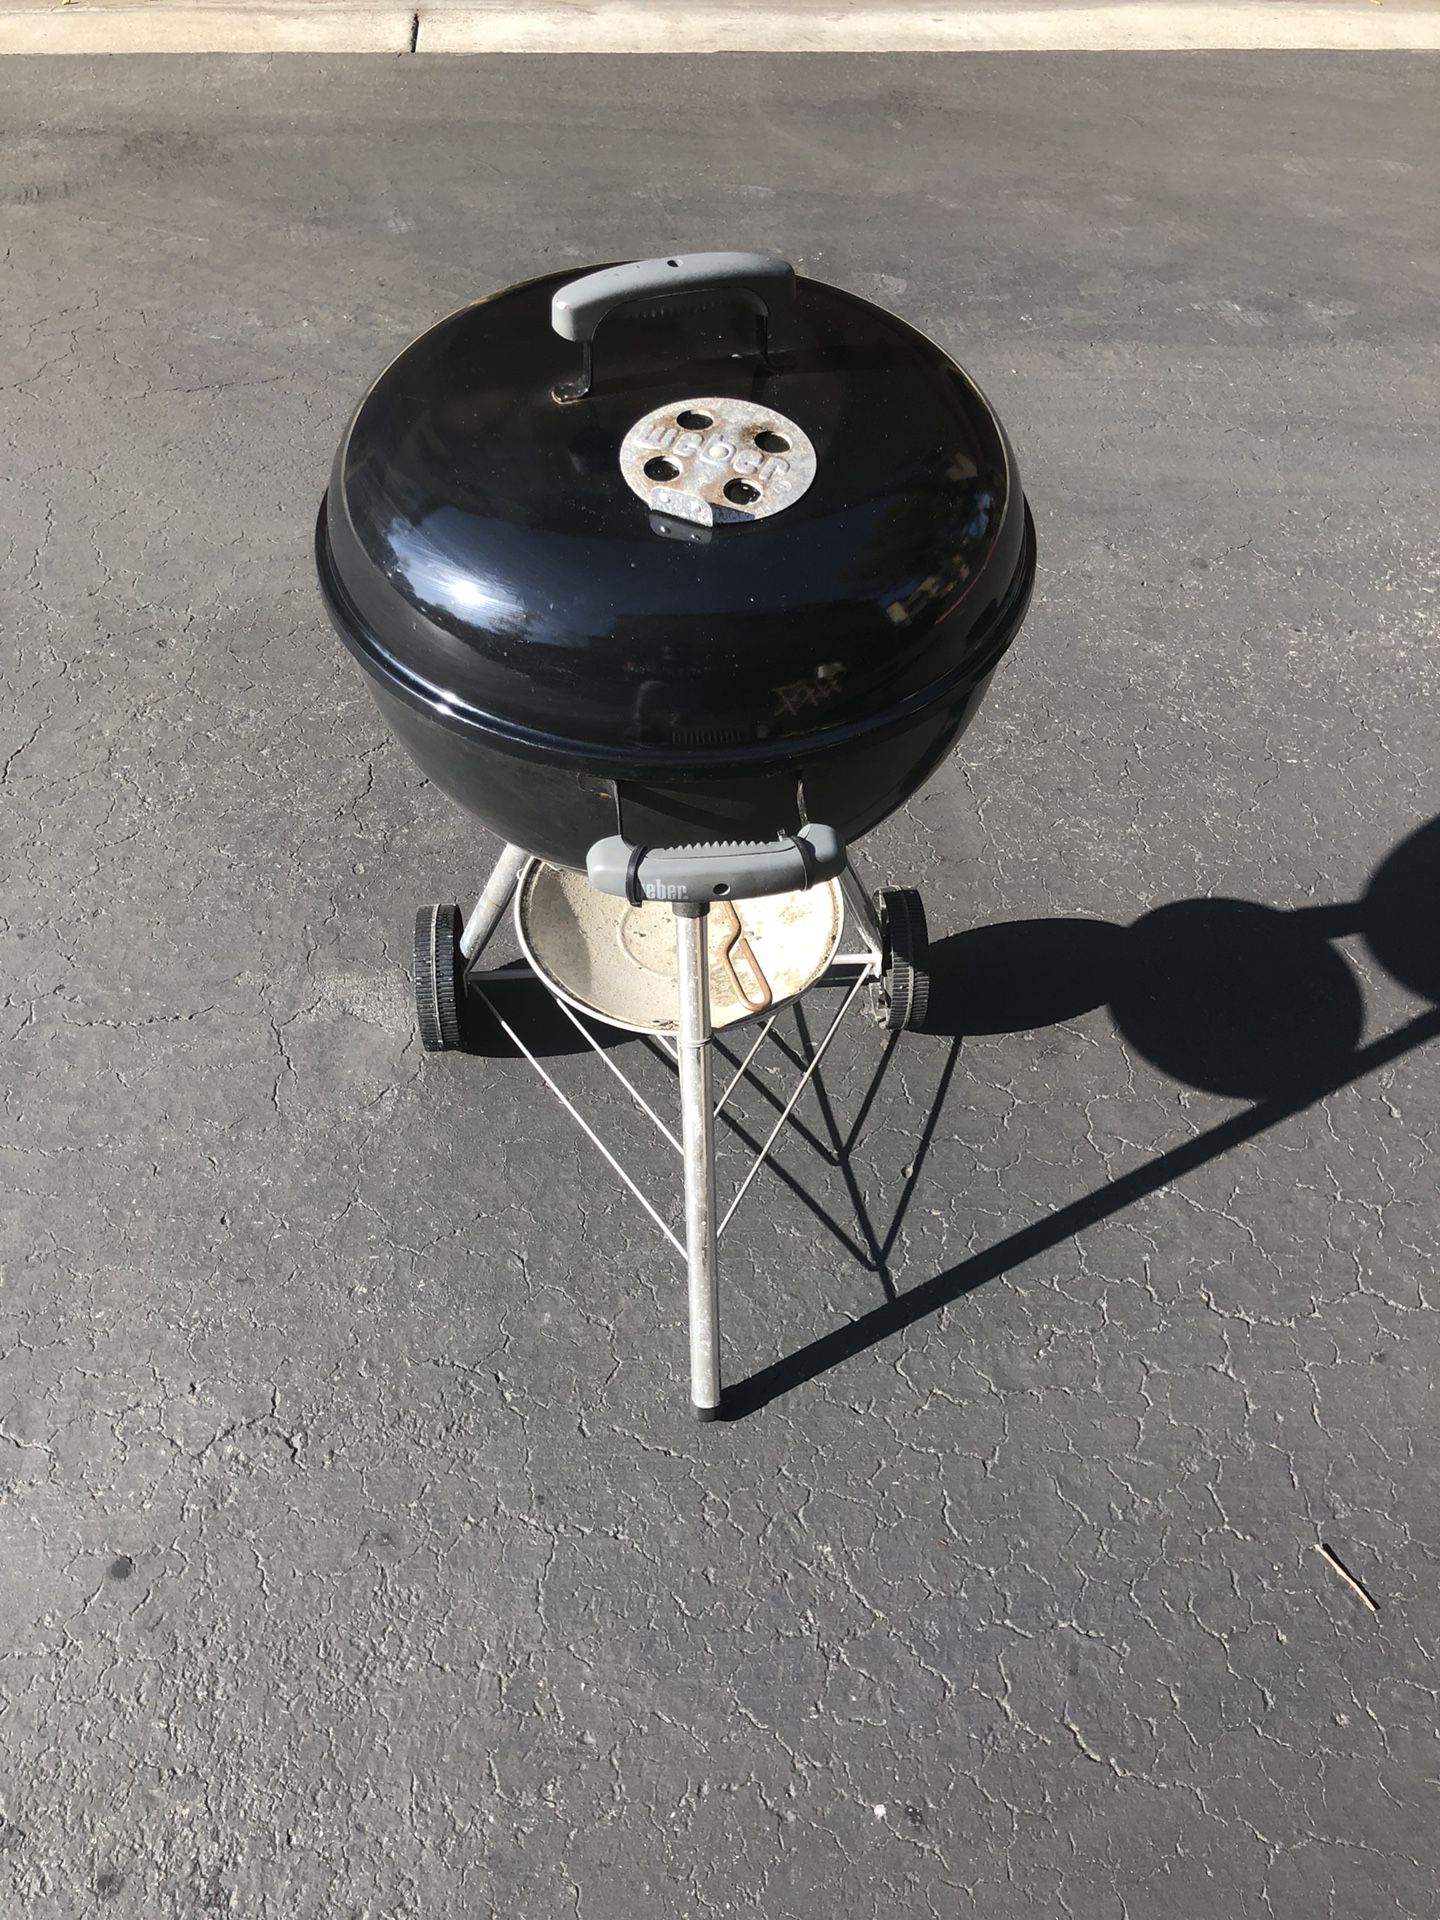 Weber Grill 25.00 OBO! Need to sell ASAP